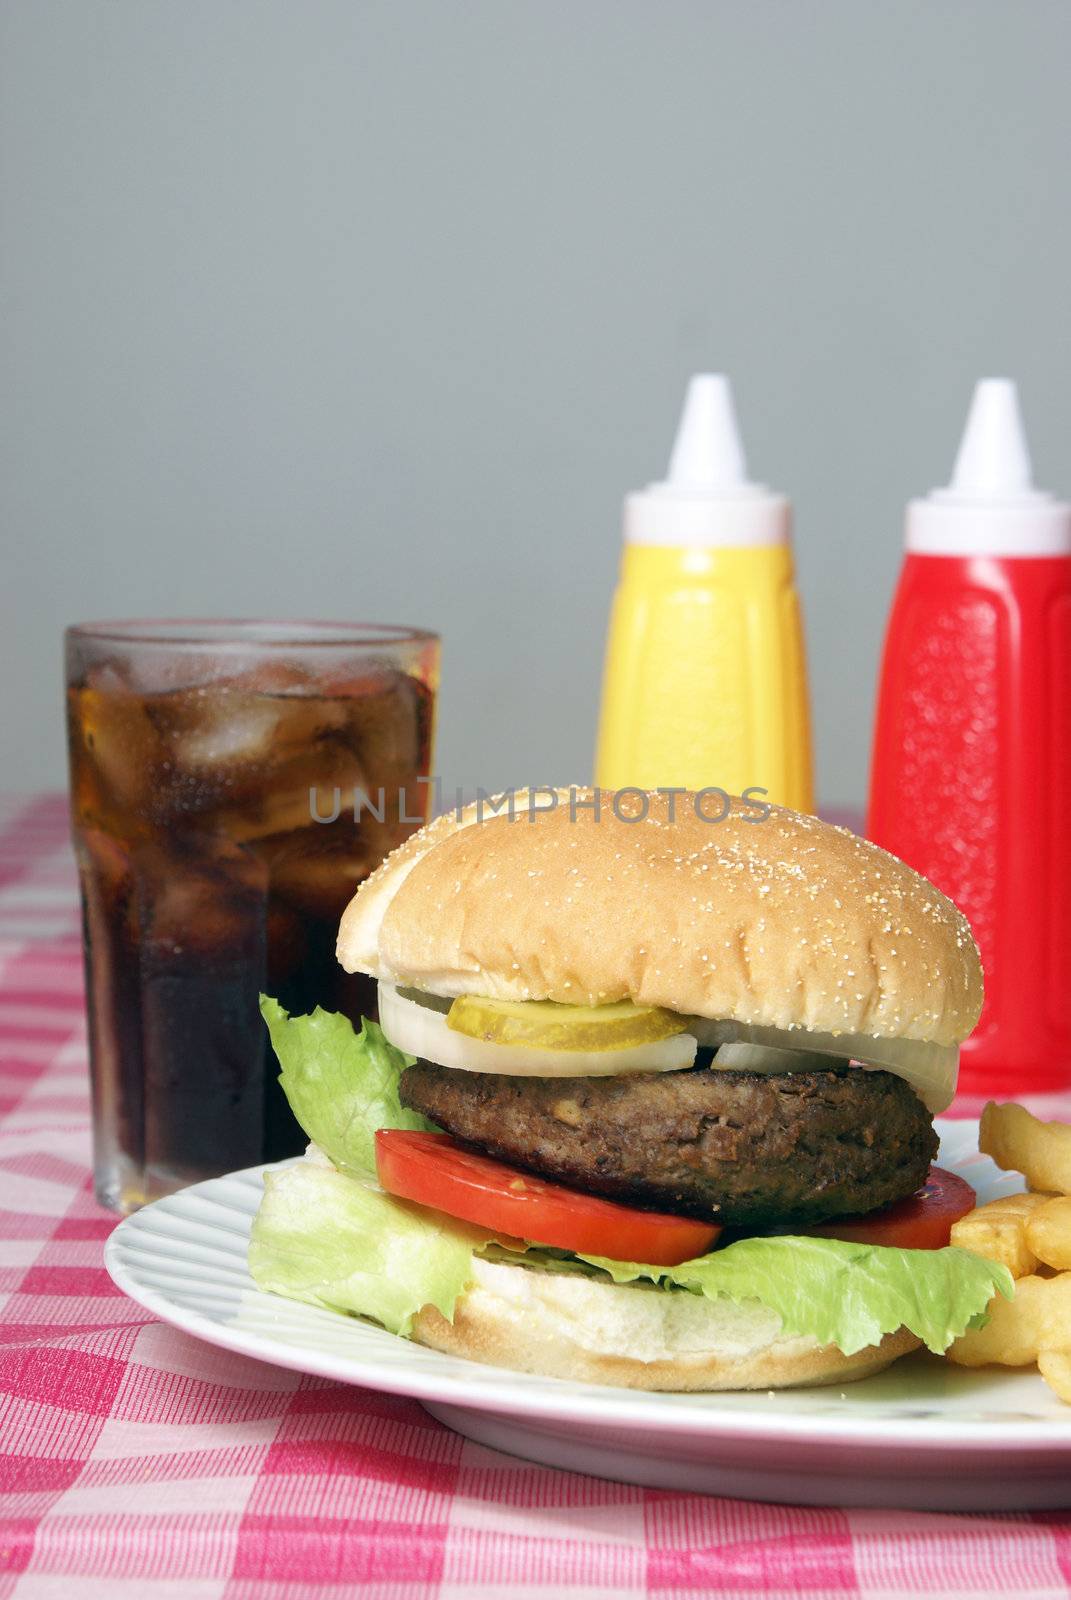 A freshly cooked hamburger and fries meal on a checkered tablecloth.